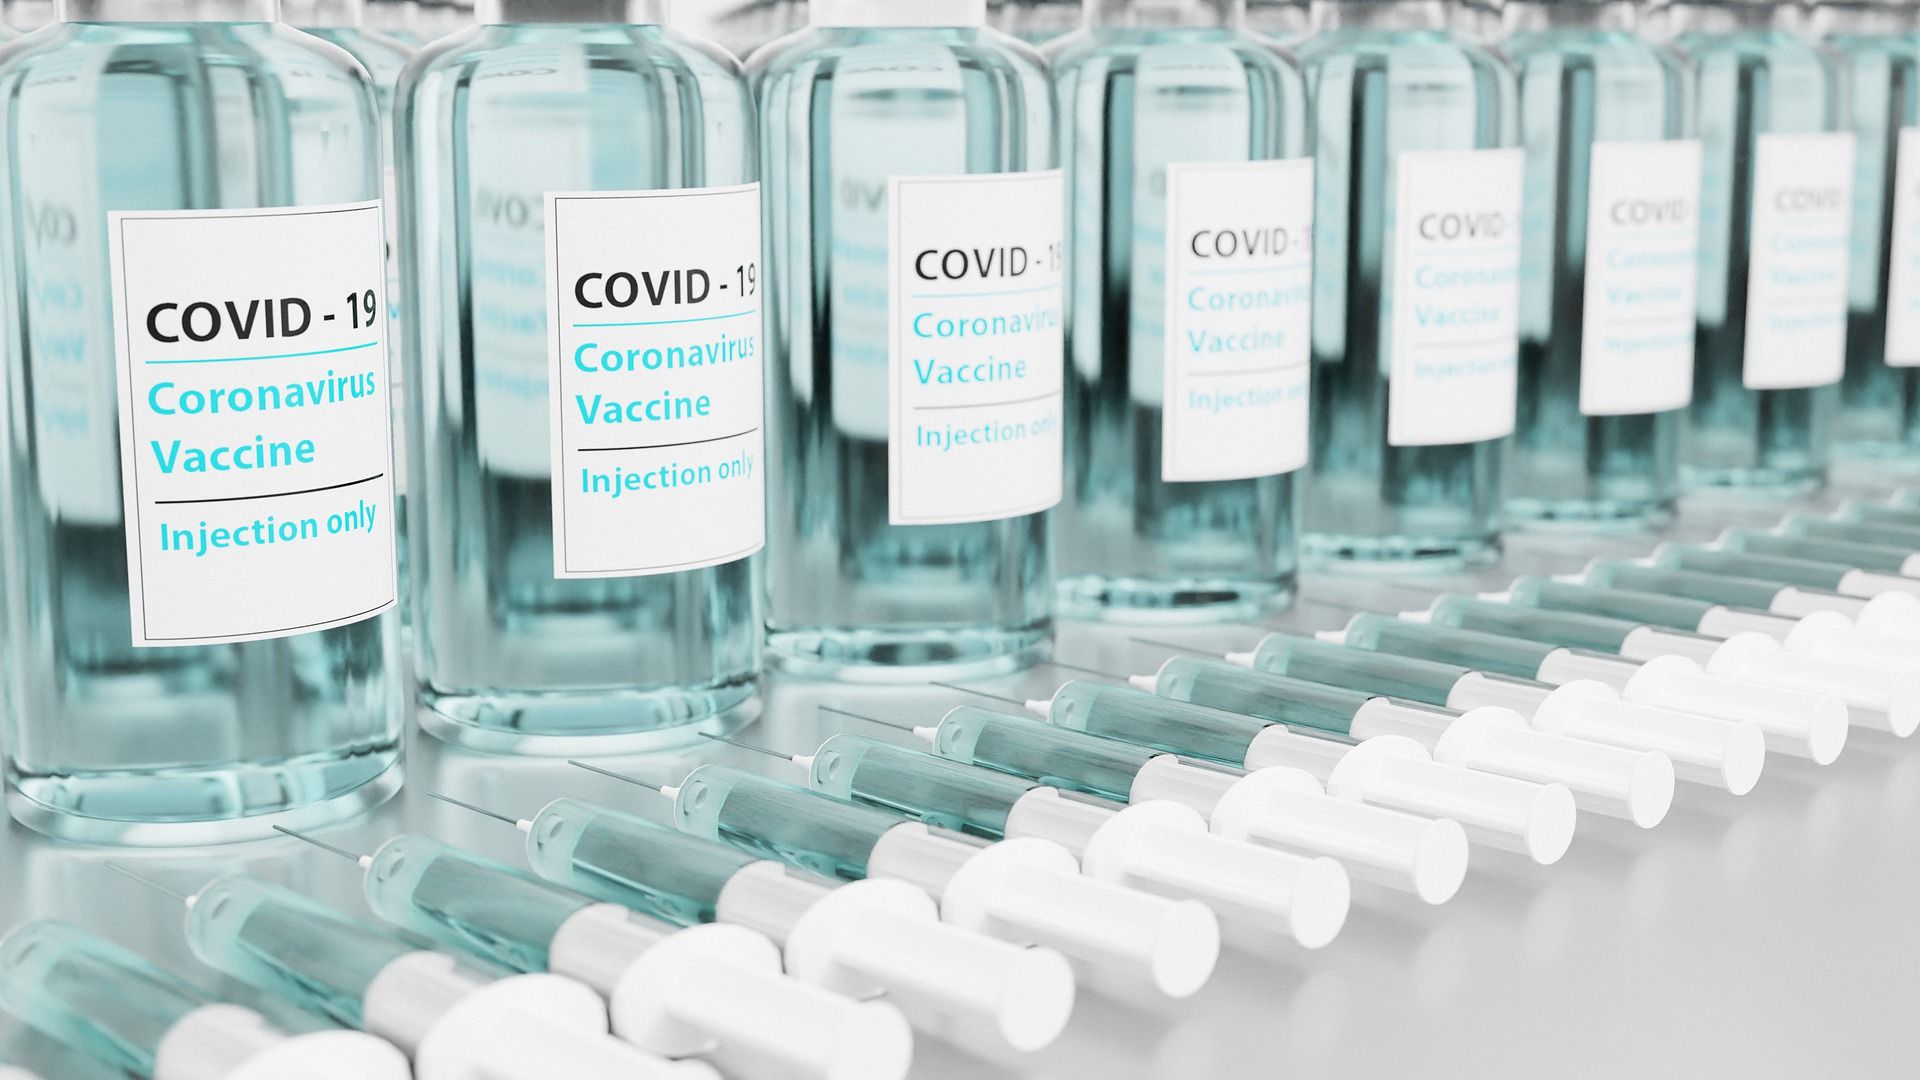 Explained: Why some countries still have low vaccination rates against COVID?